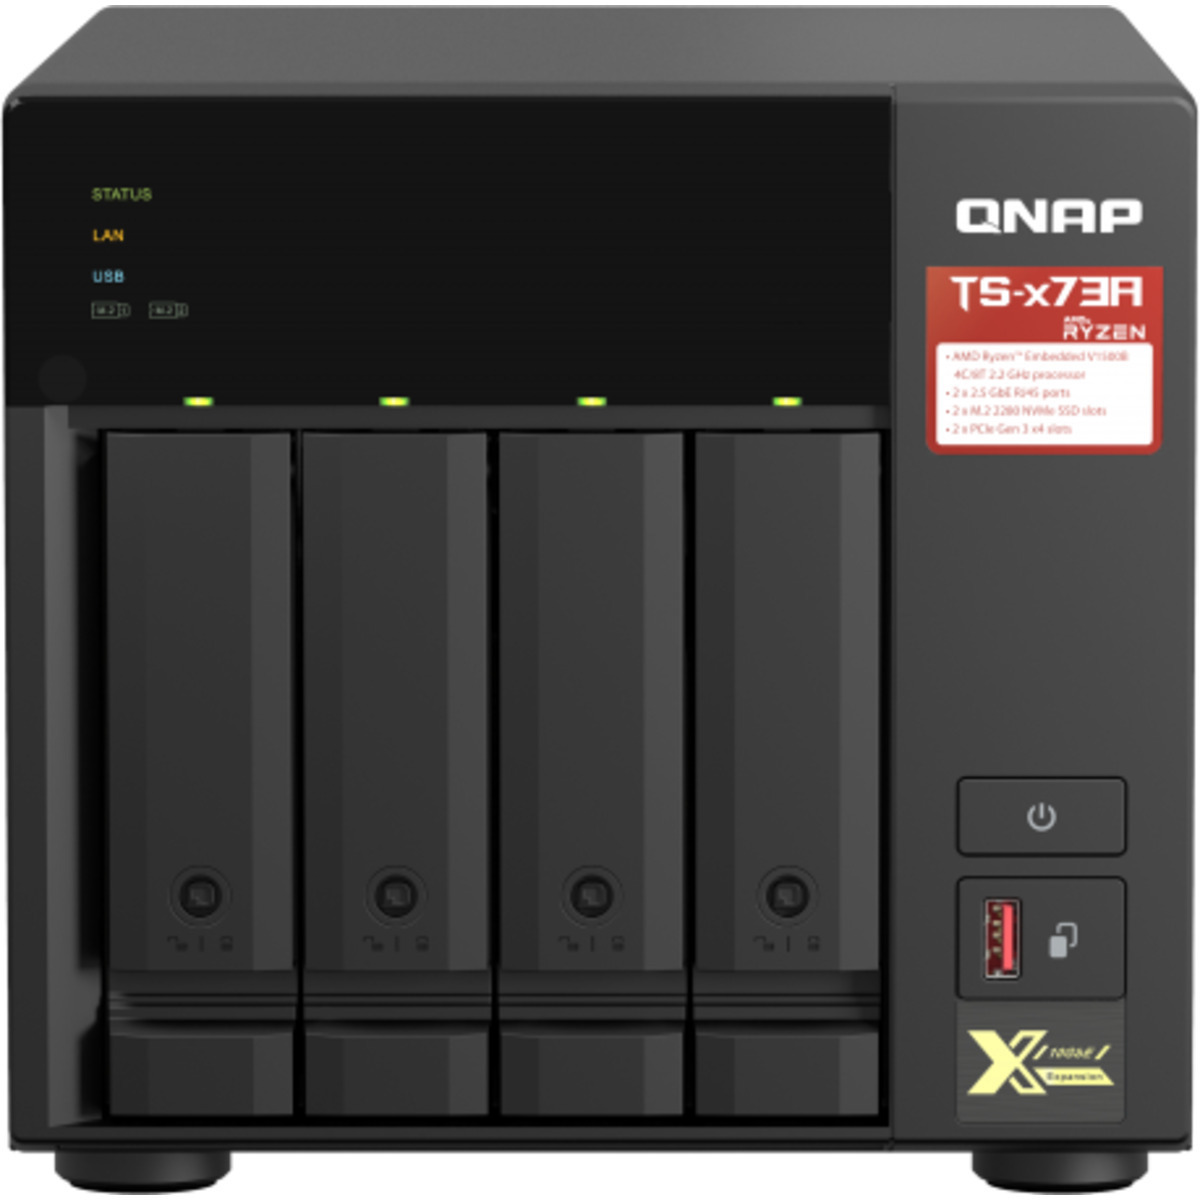 buy $2911 QNAP TS-473A 80tb Desktop NAS - Network Attached Storage Device 4x20000gb Western Digital Red Pro WD201KFGX 3.5 7200rpm SATA 6Gb/s HDD NAS Class Drives Installed - Burn-In Tested - nas headquarters buy network attached storage server device das new raid-5 free shipping simply usa TS-473A